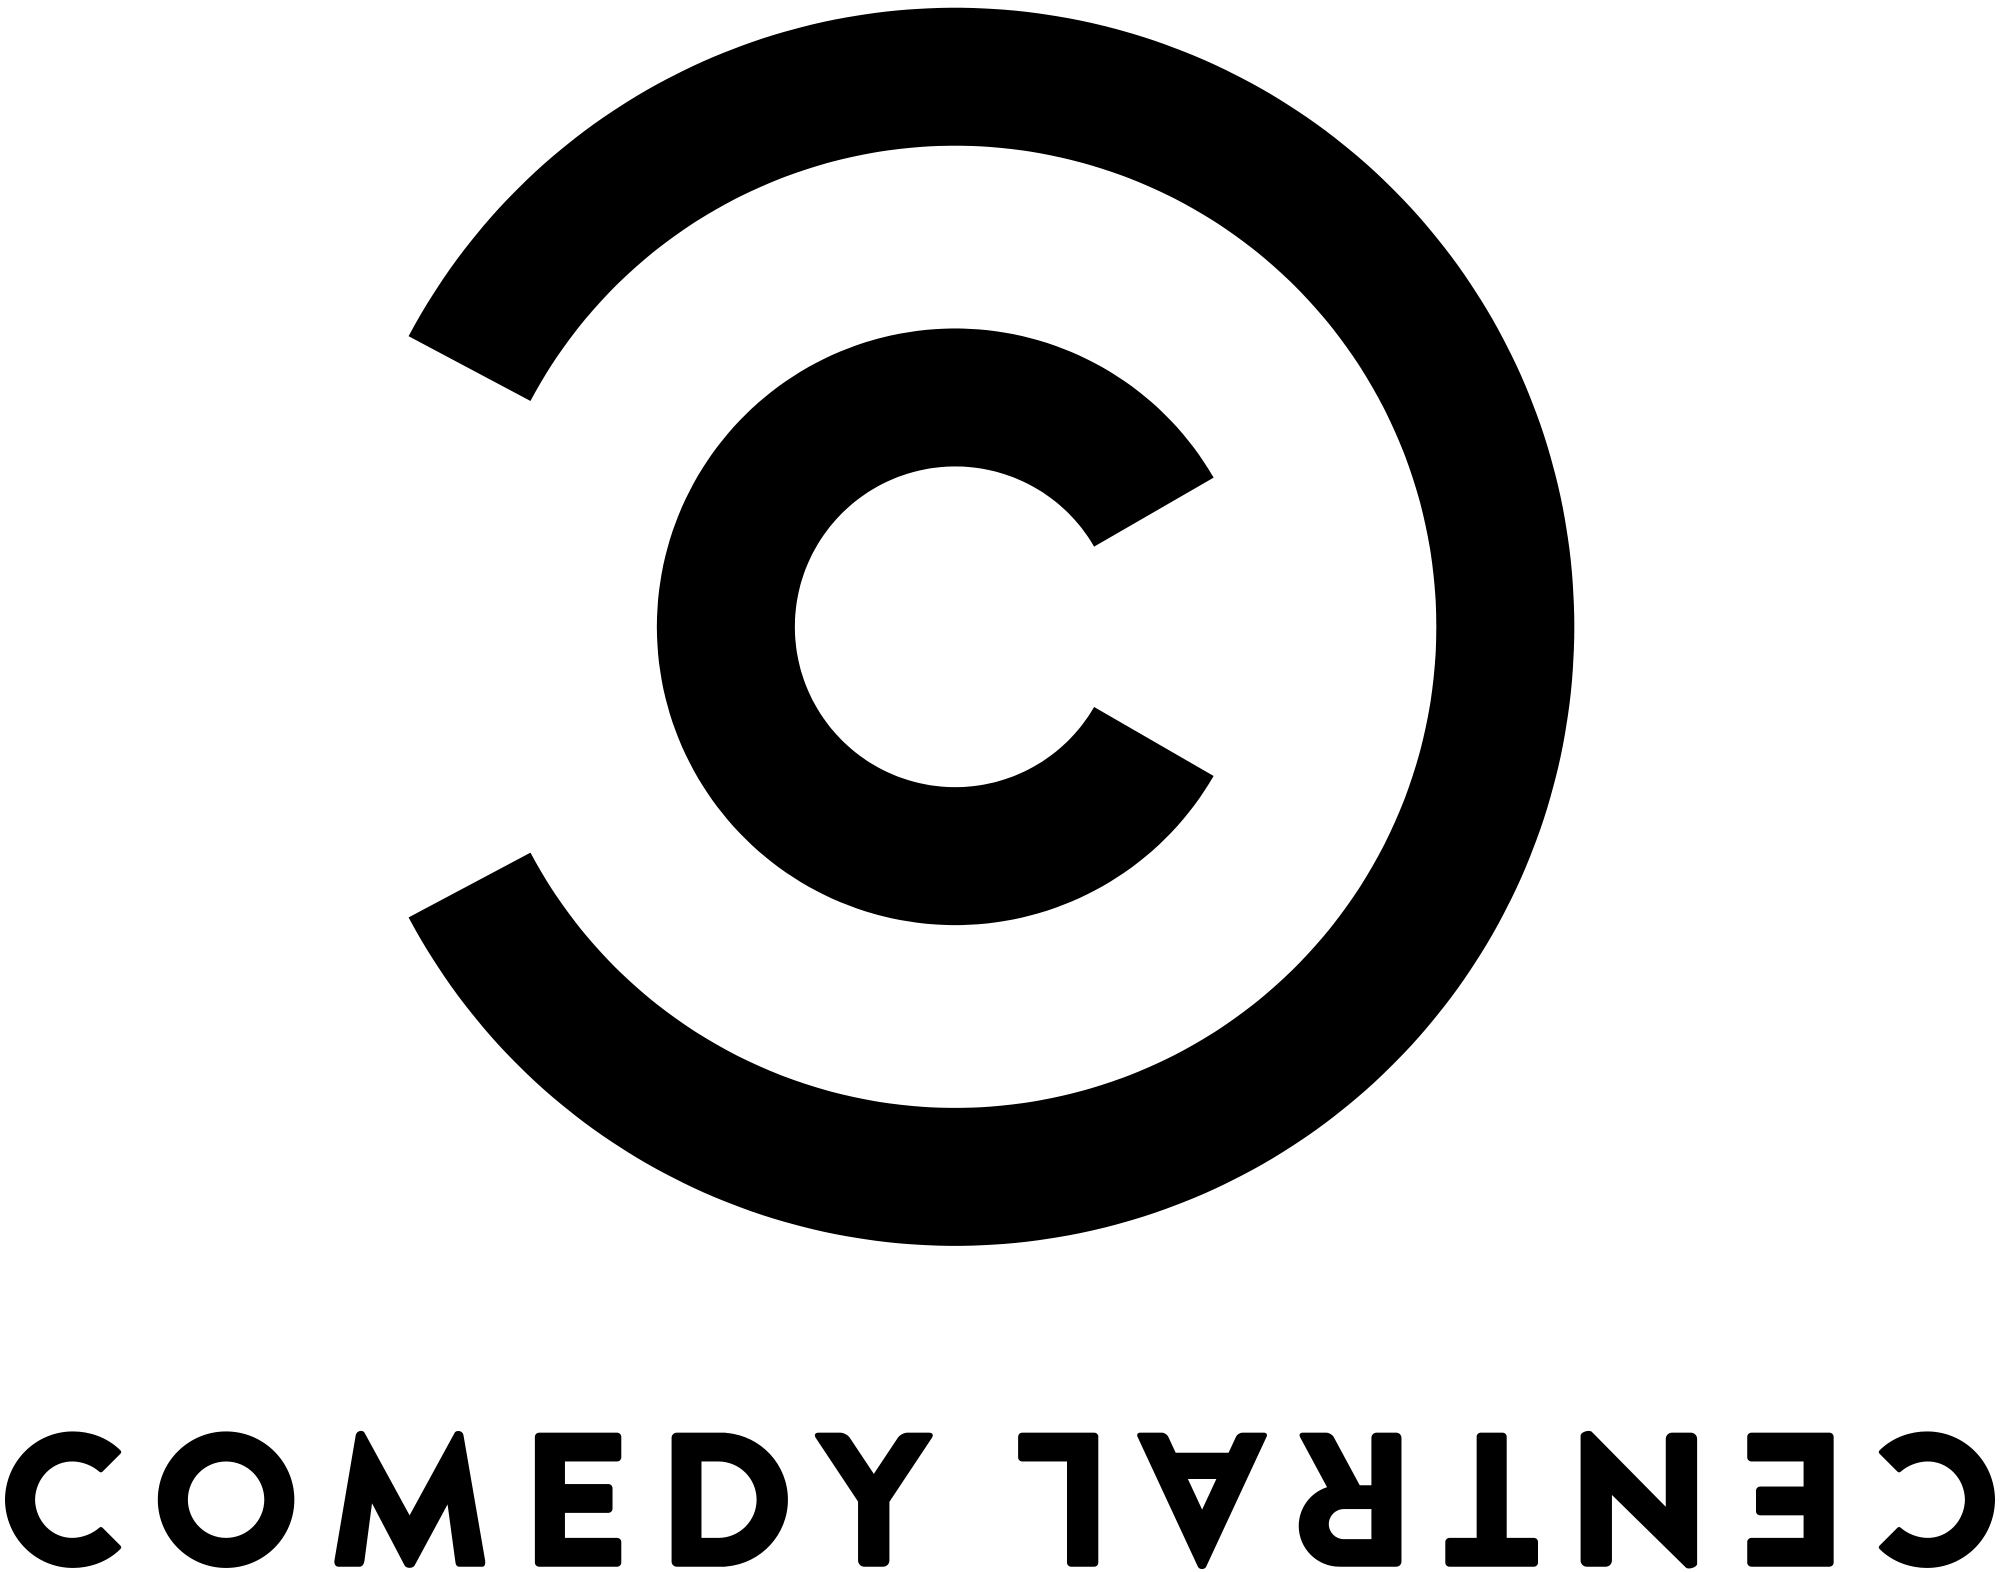 Black and White C Logo - Image - 2000px-Comedy Central 2011 Logo.svg.png | Harkipedia ...